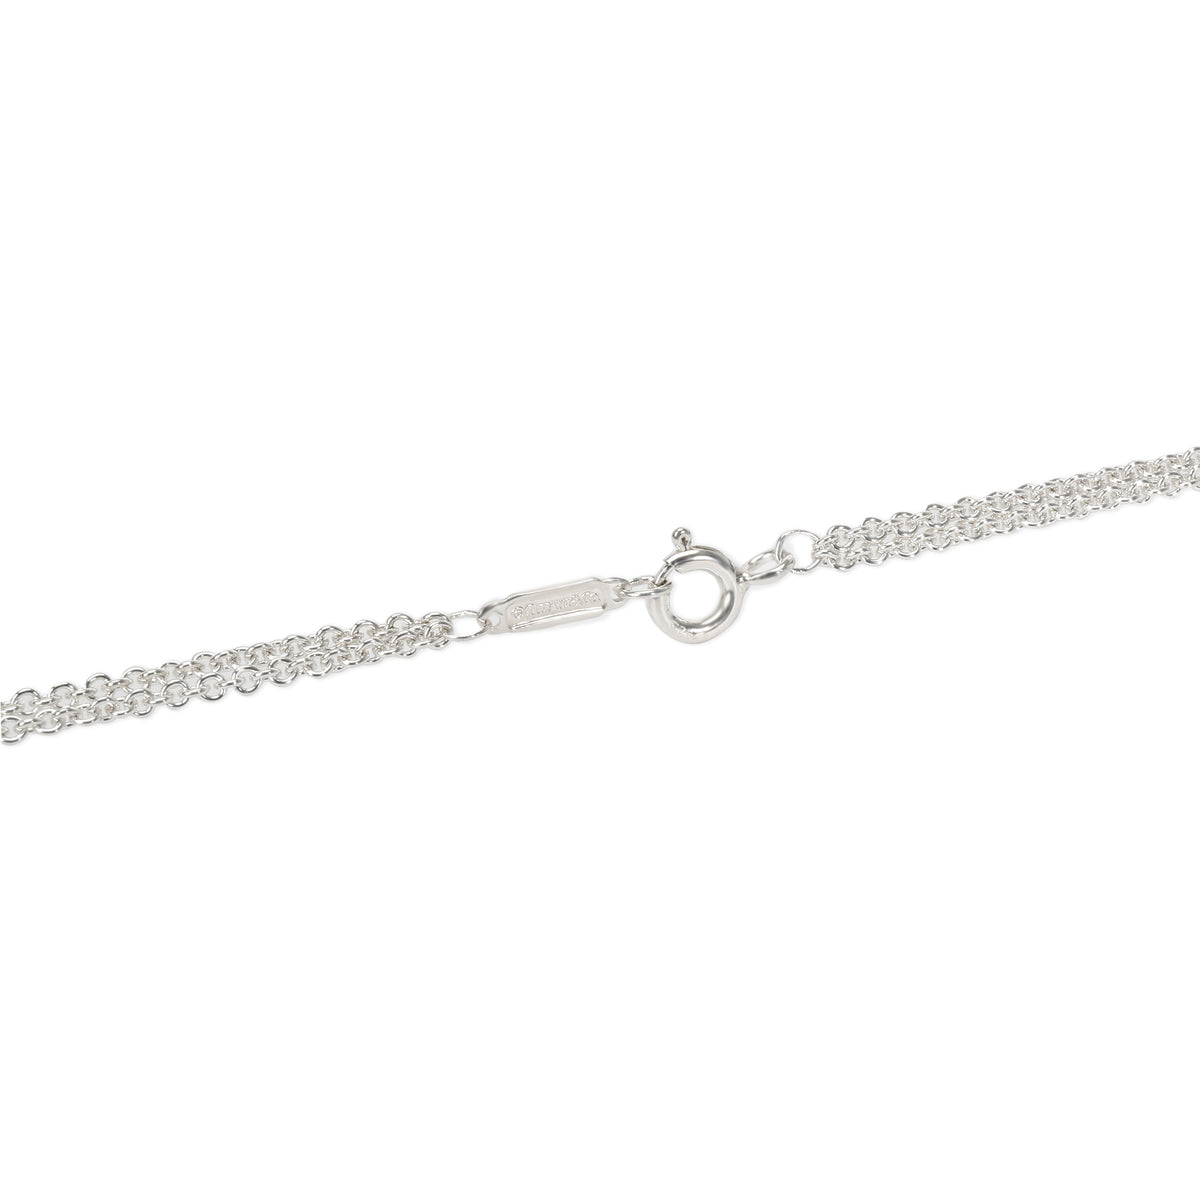 Tiffany & Co. Infinity Necklace in  Sterling Silver